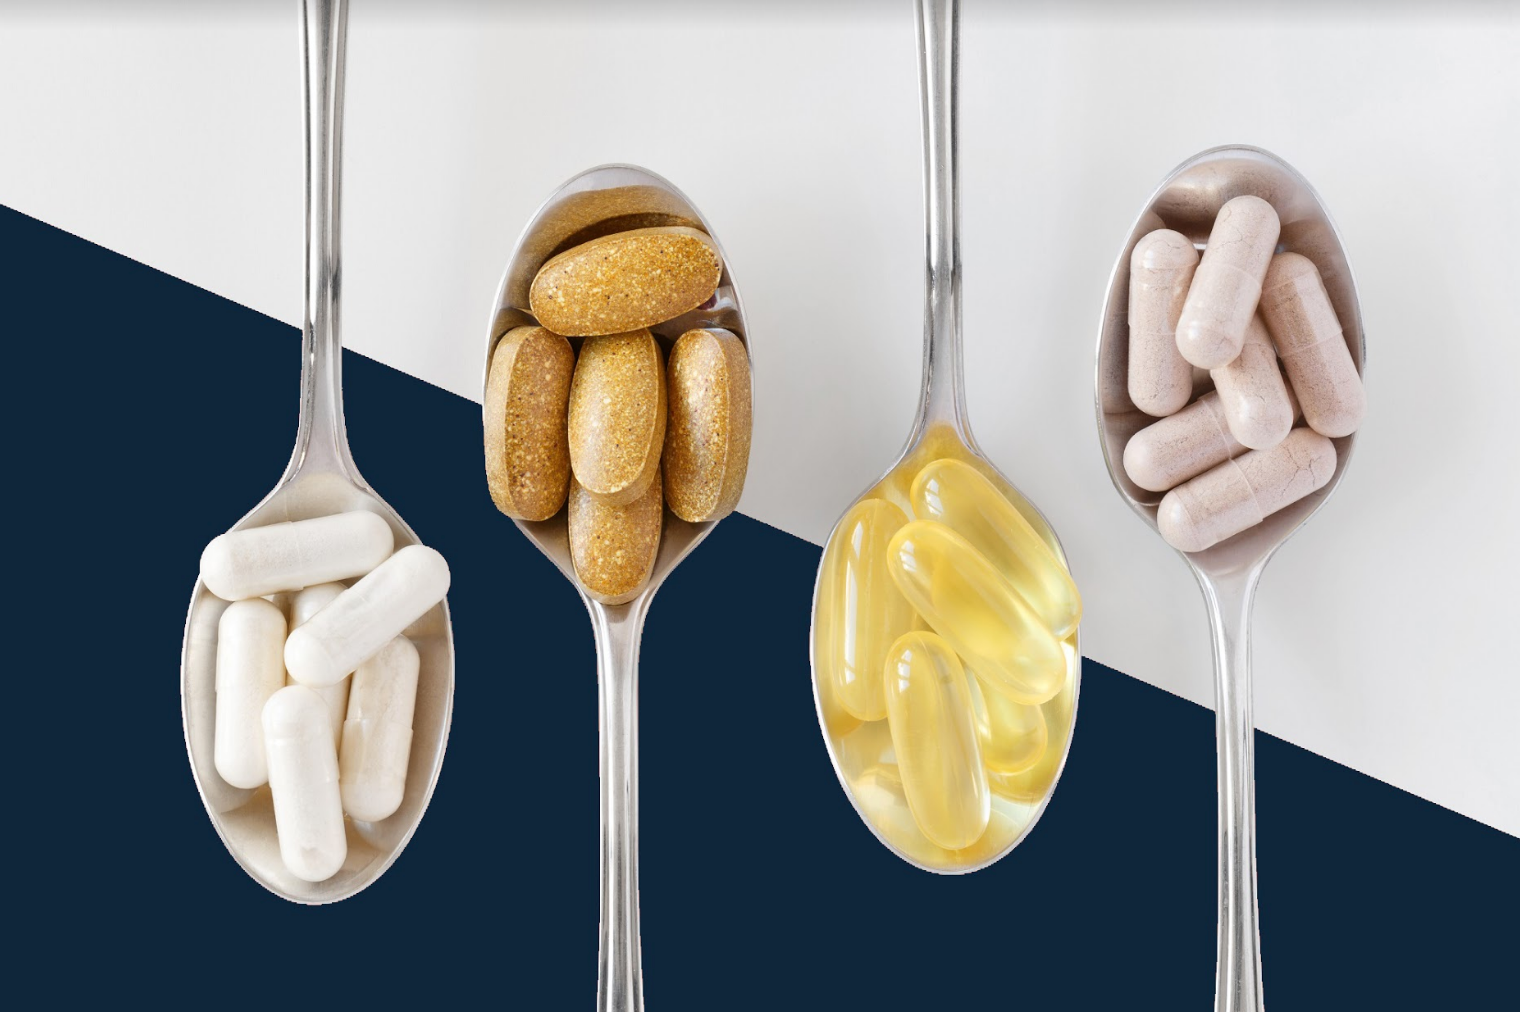 Supplements vs. food: How much food do you need?